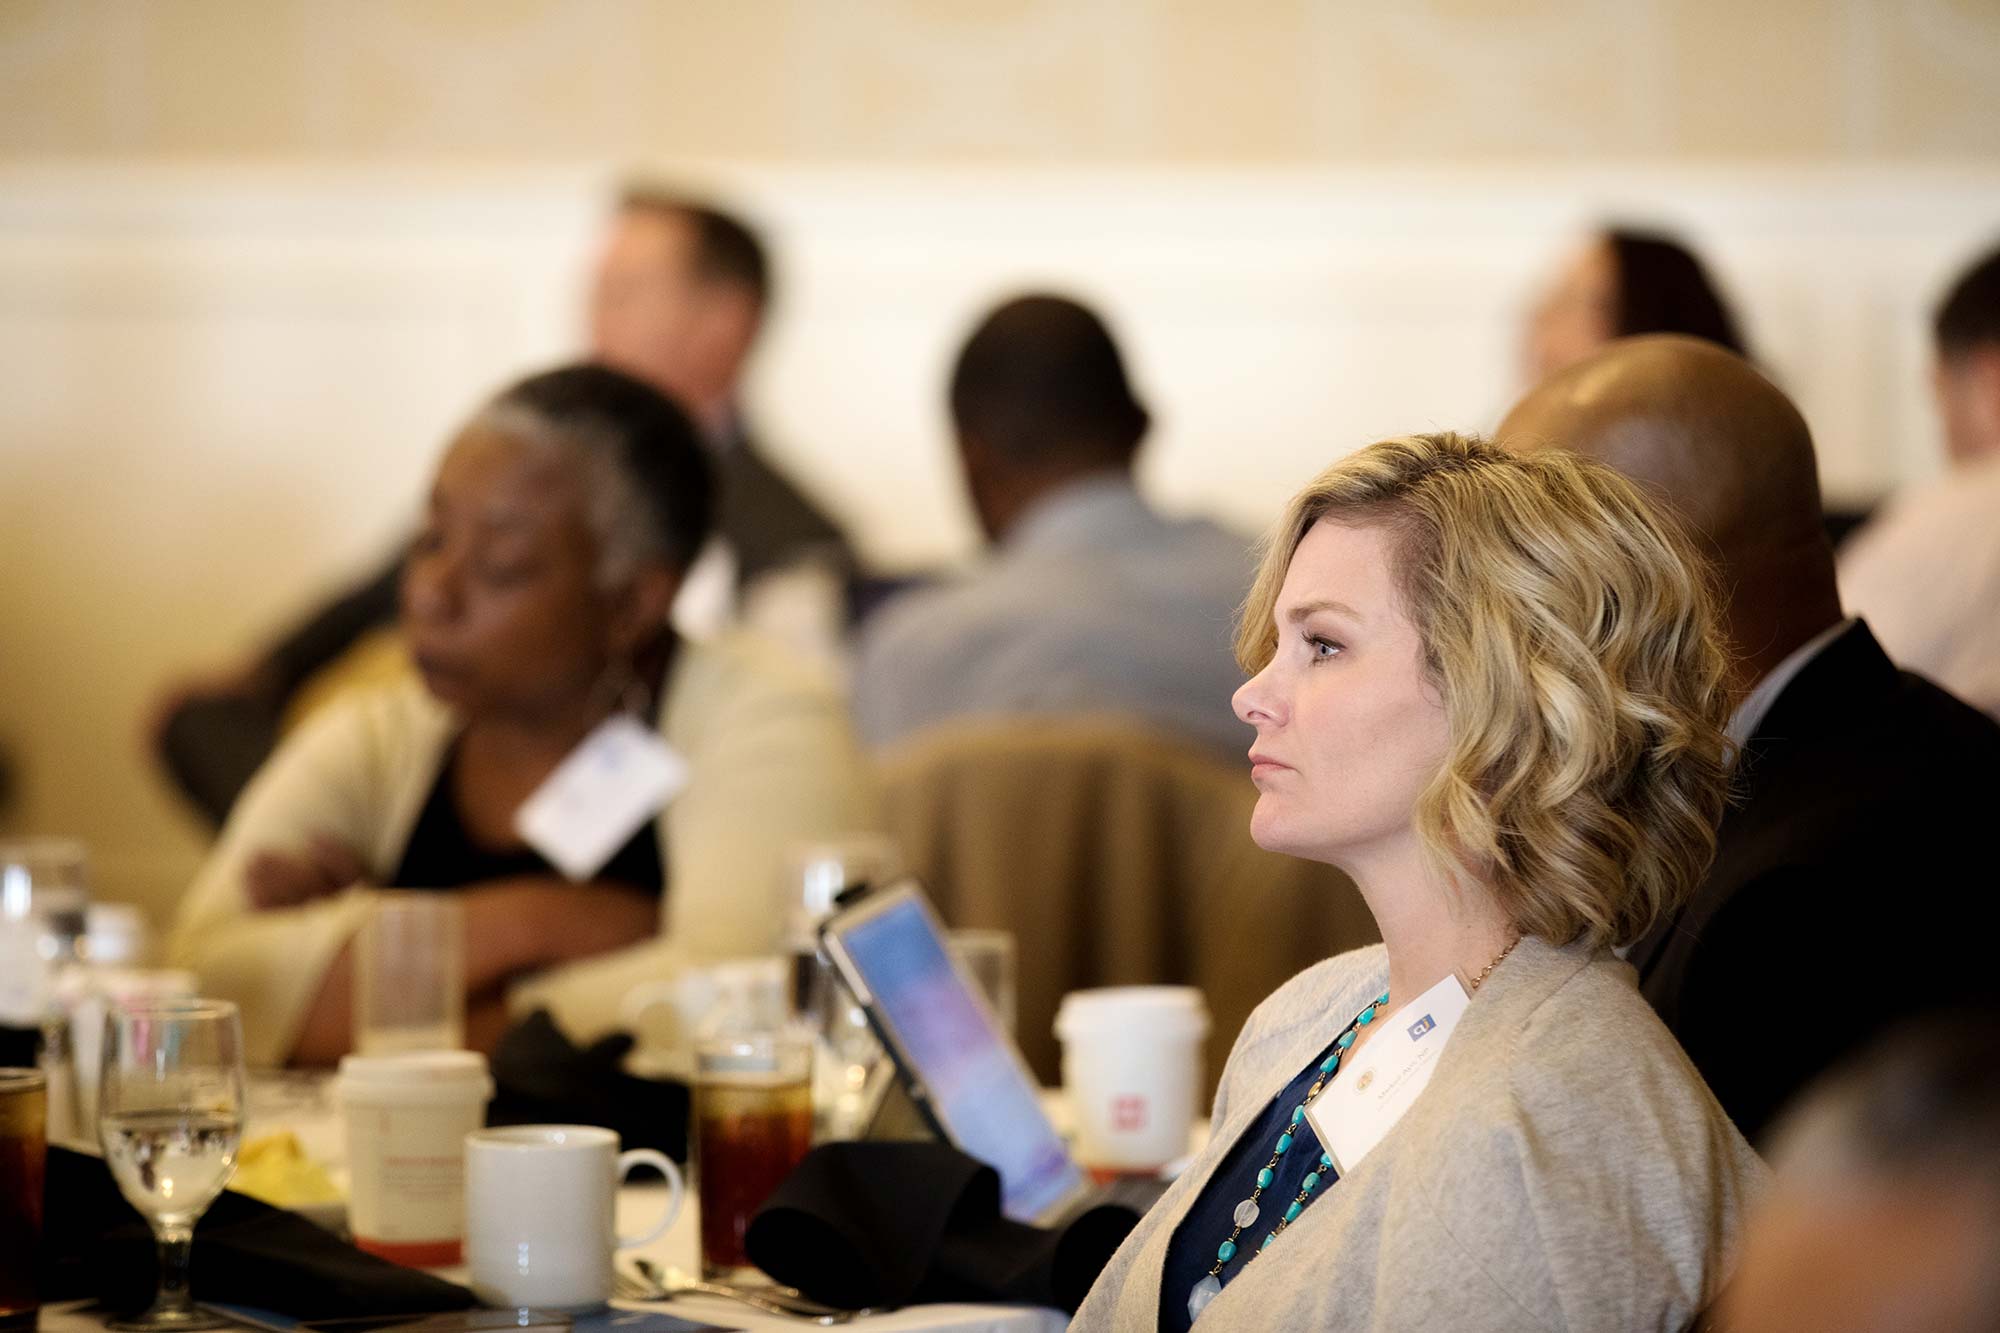 Woman watching speakers at conference